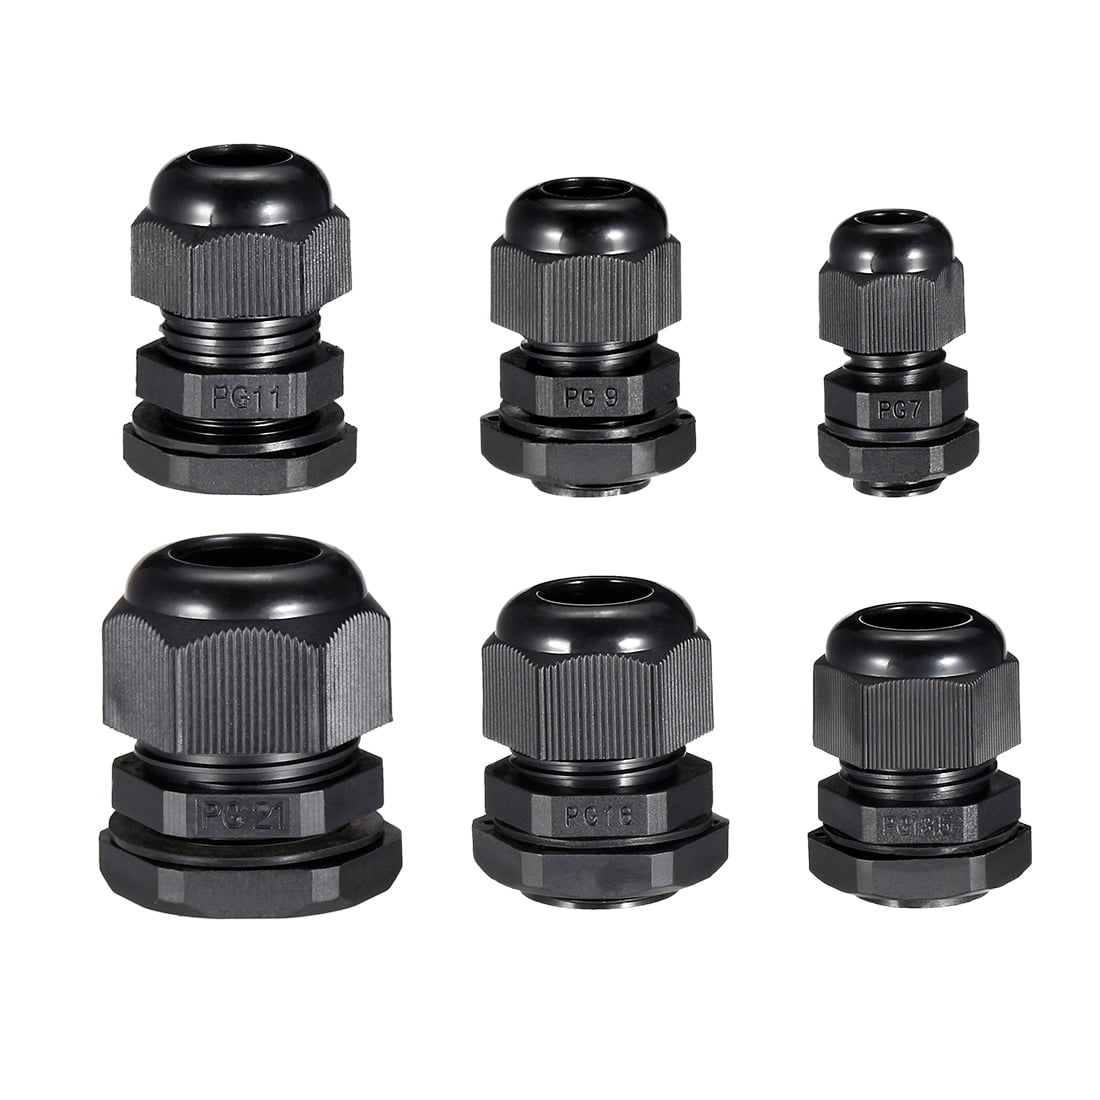 uxcell Cable Gland PG11 Metal Waterproof Cable Glands Joints Adjustable Connector for 5-10mm Dia Cable Pack of 5 